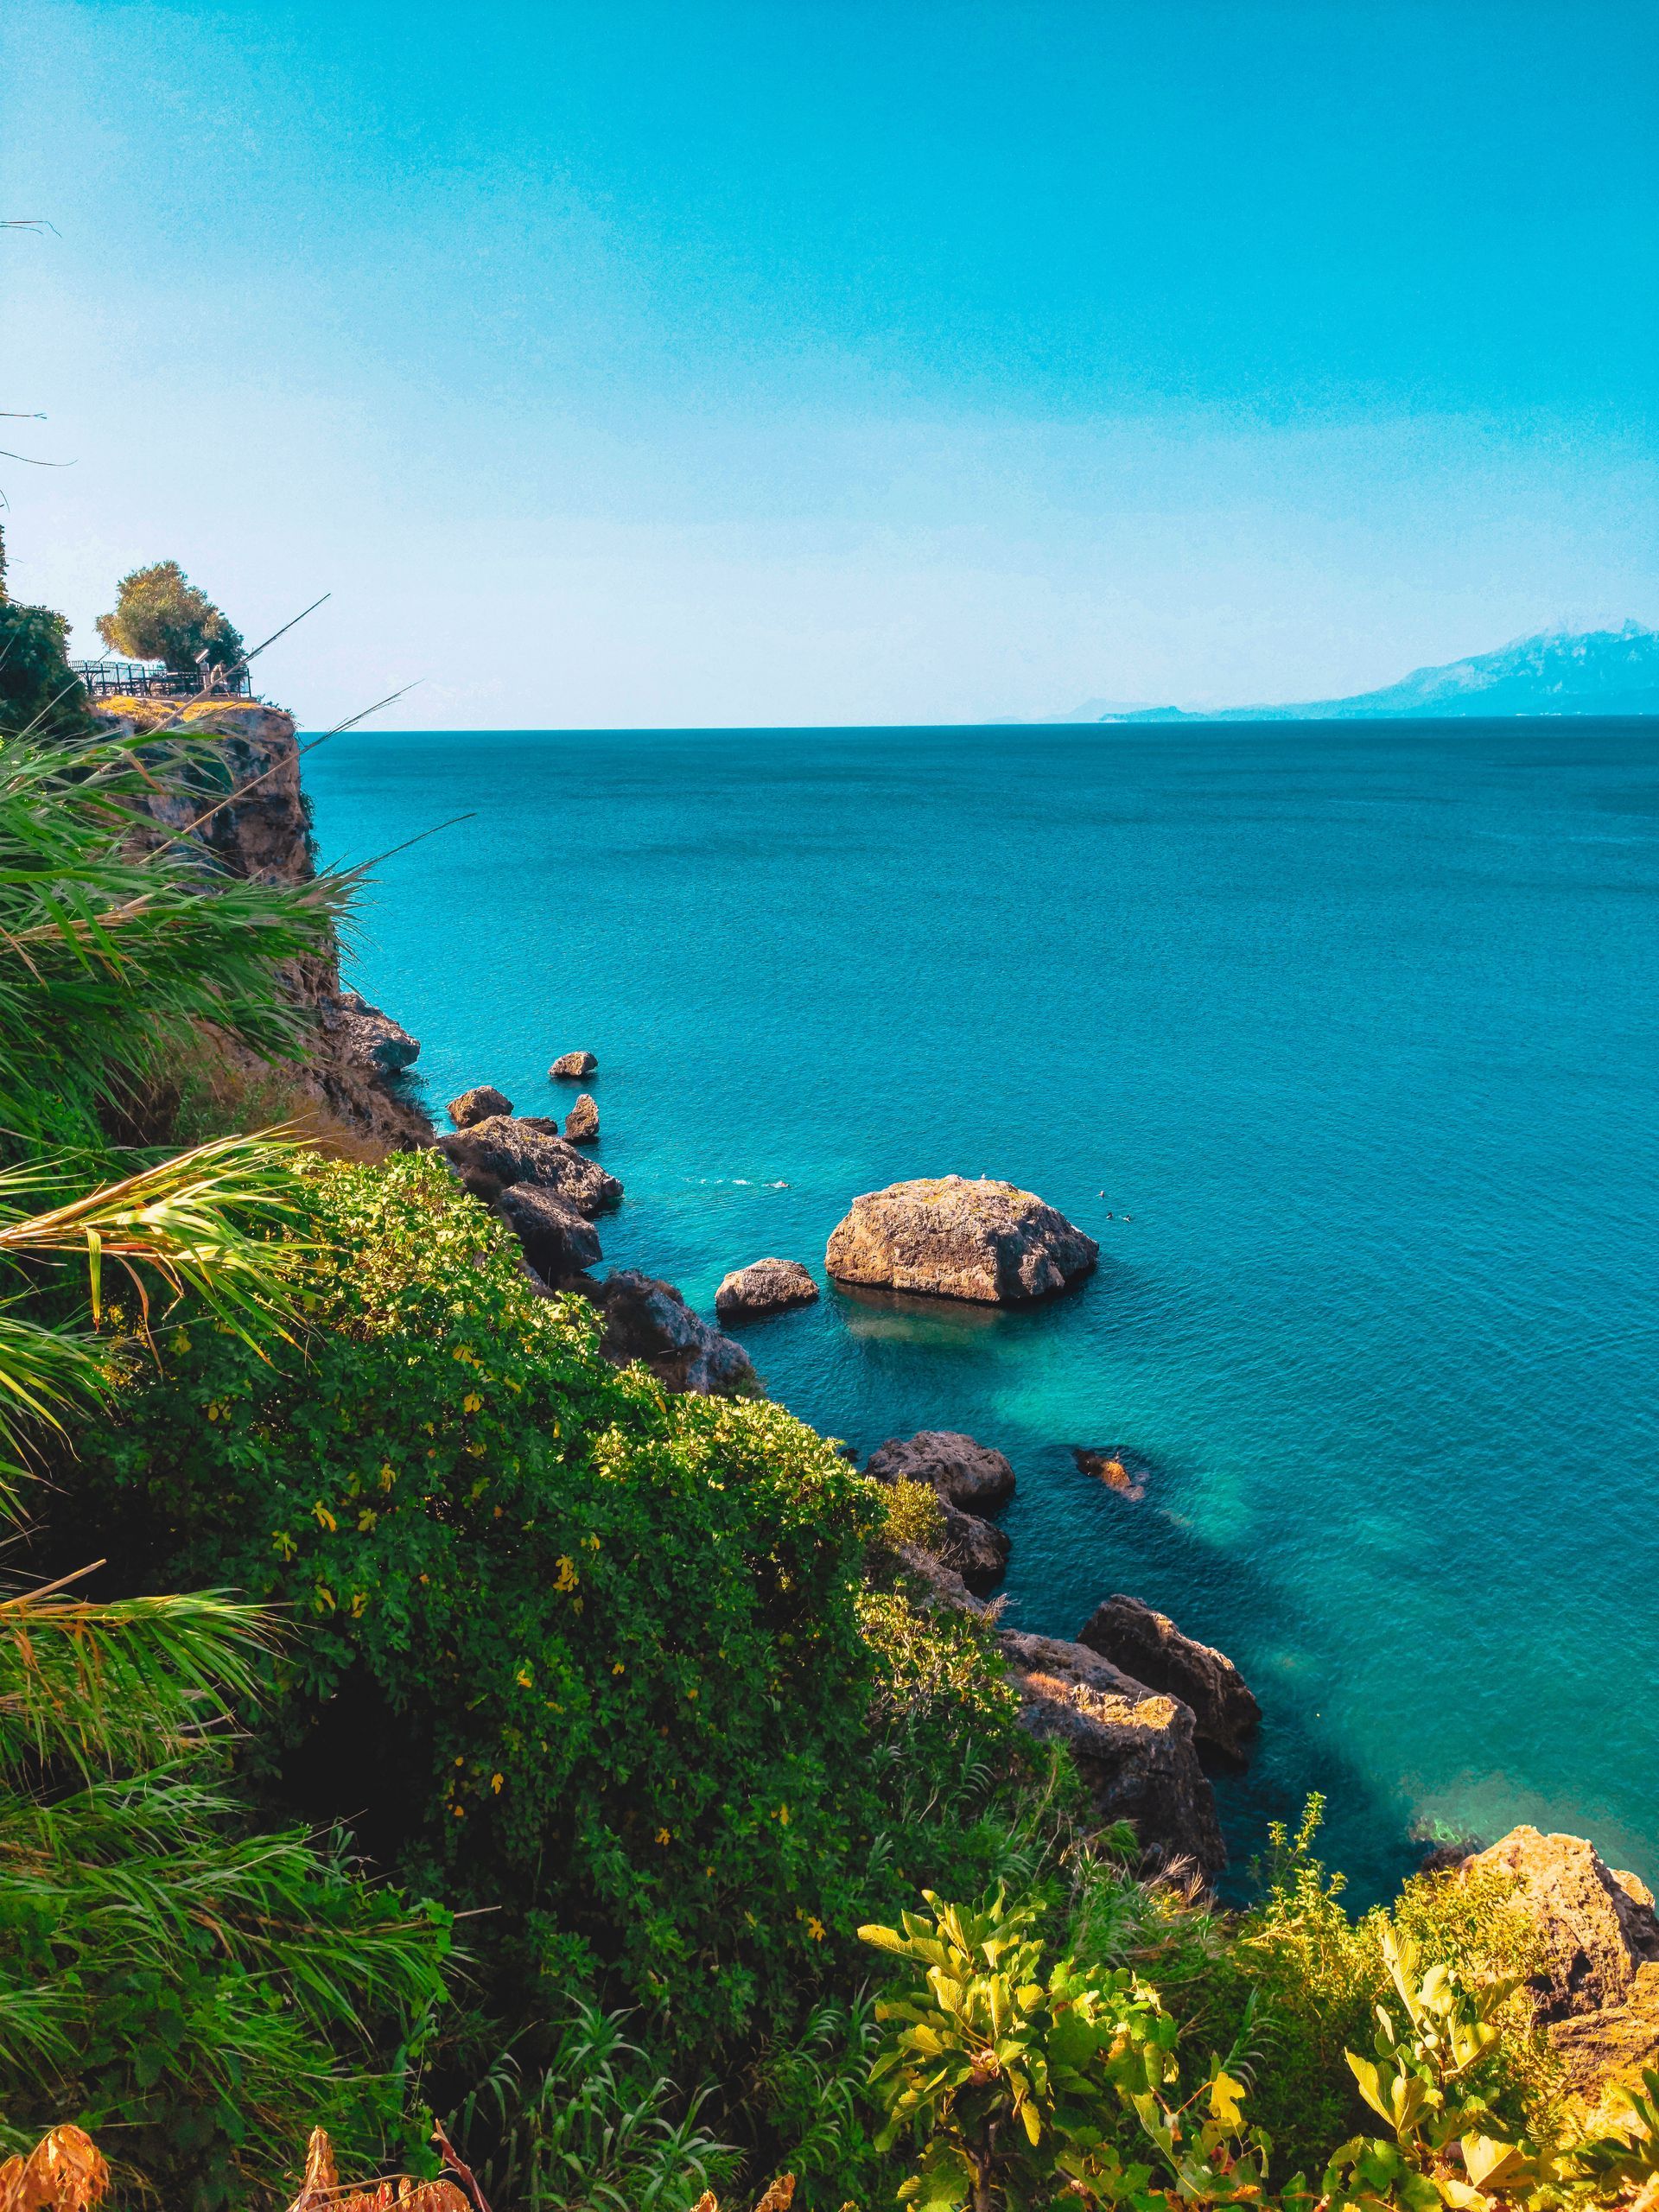 Get Ready to be Enchanted by the Wonders of Turkish Riviera